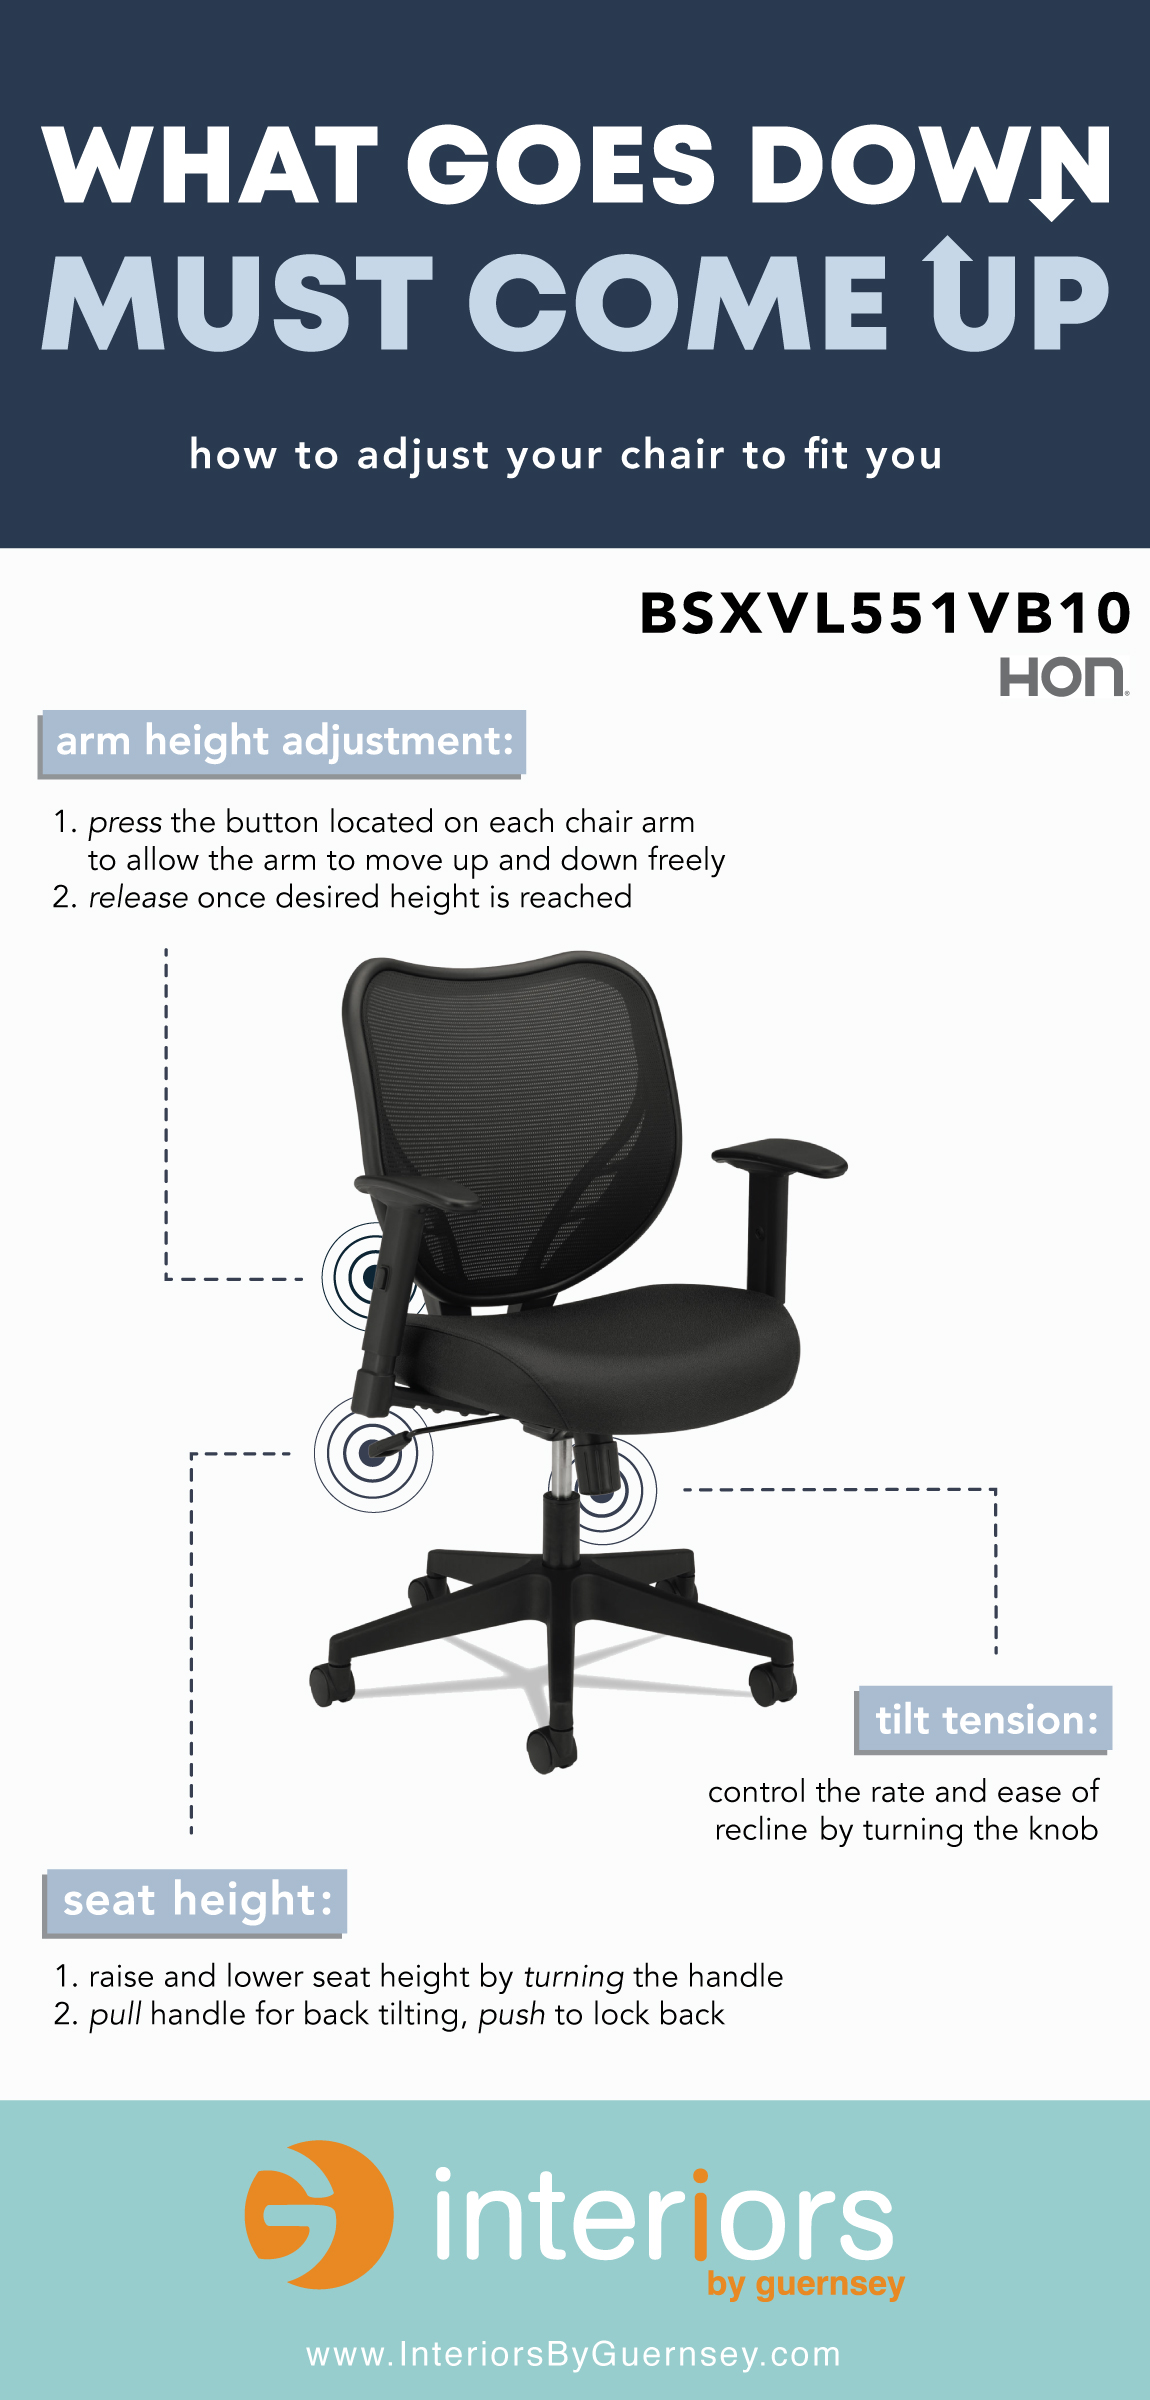 How to Adjust Your Office Chair (Infographic) - Interiors by Guernsey